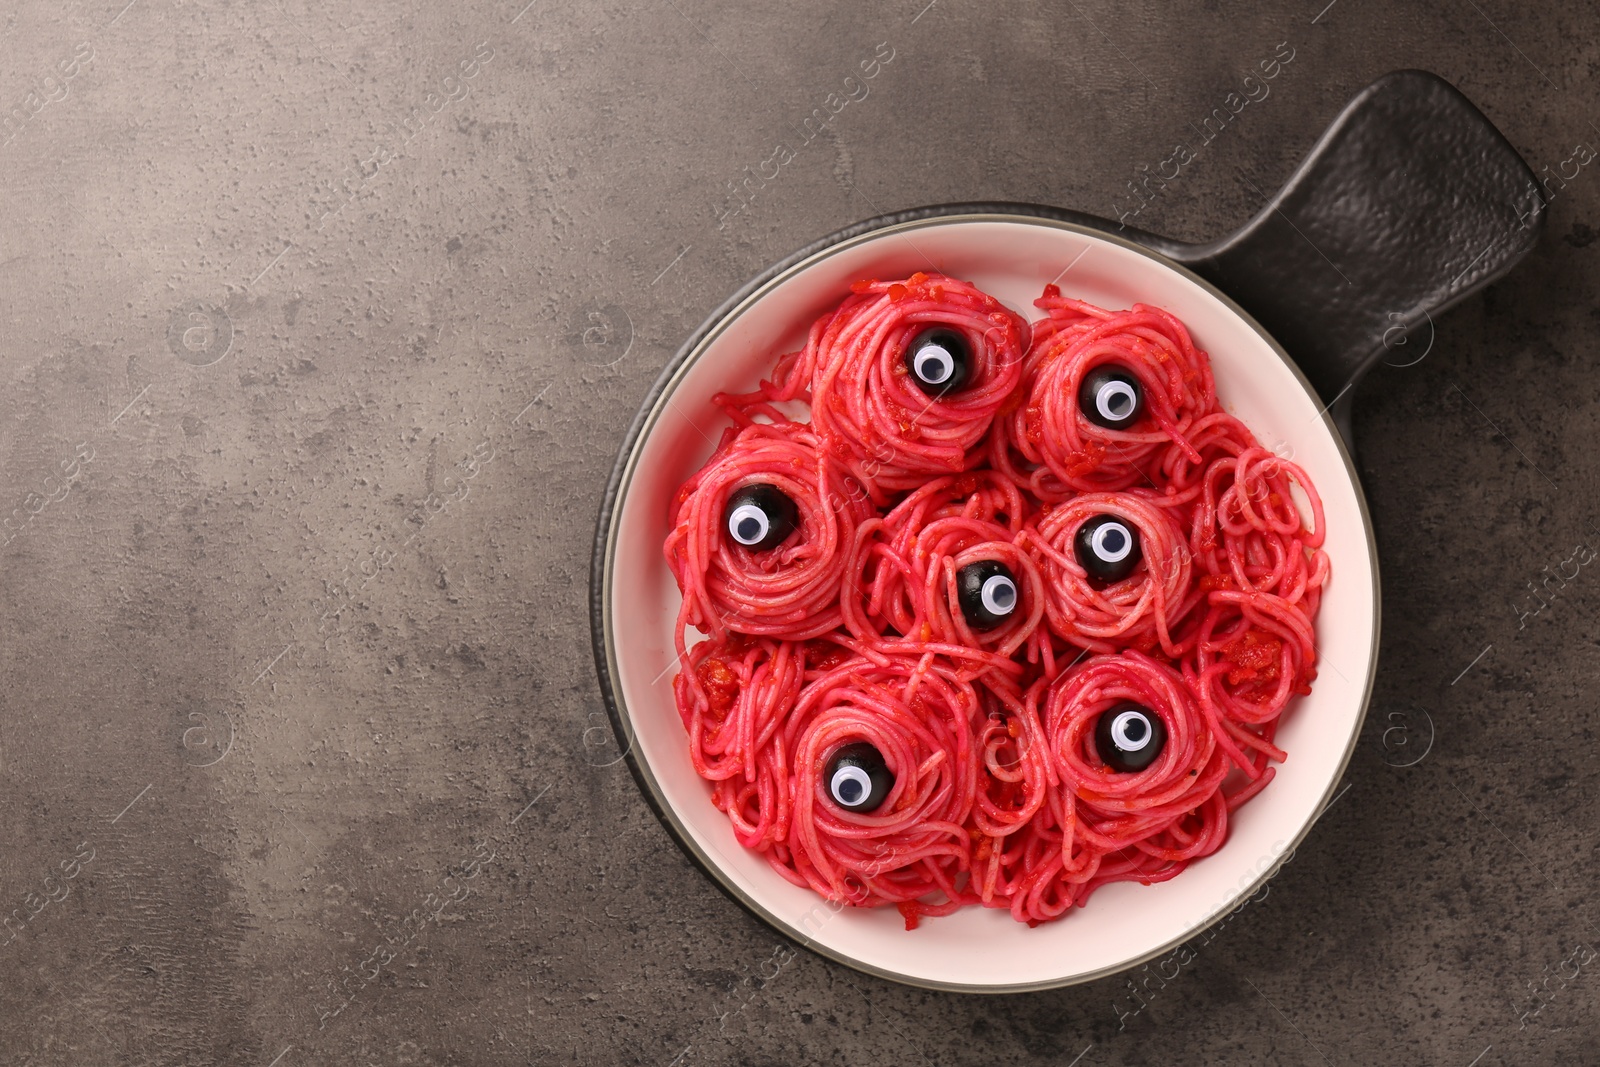 Photo of Red pasta with decorative eyes and olives in bowl on grey textured table, top view with space for text. Halloween food